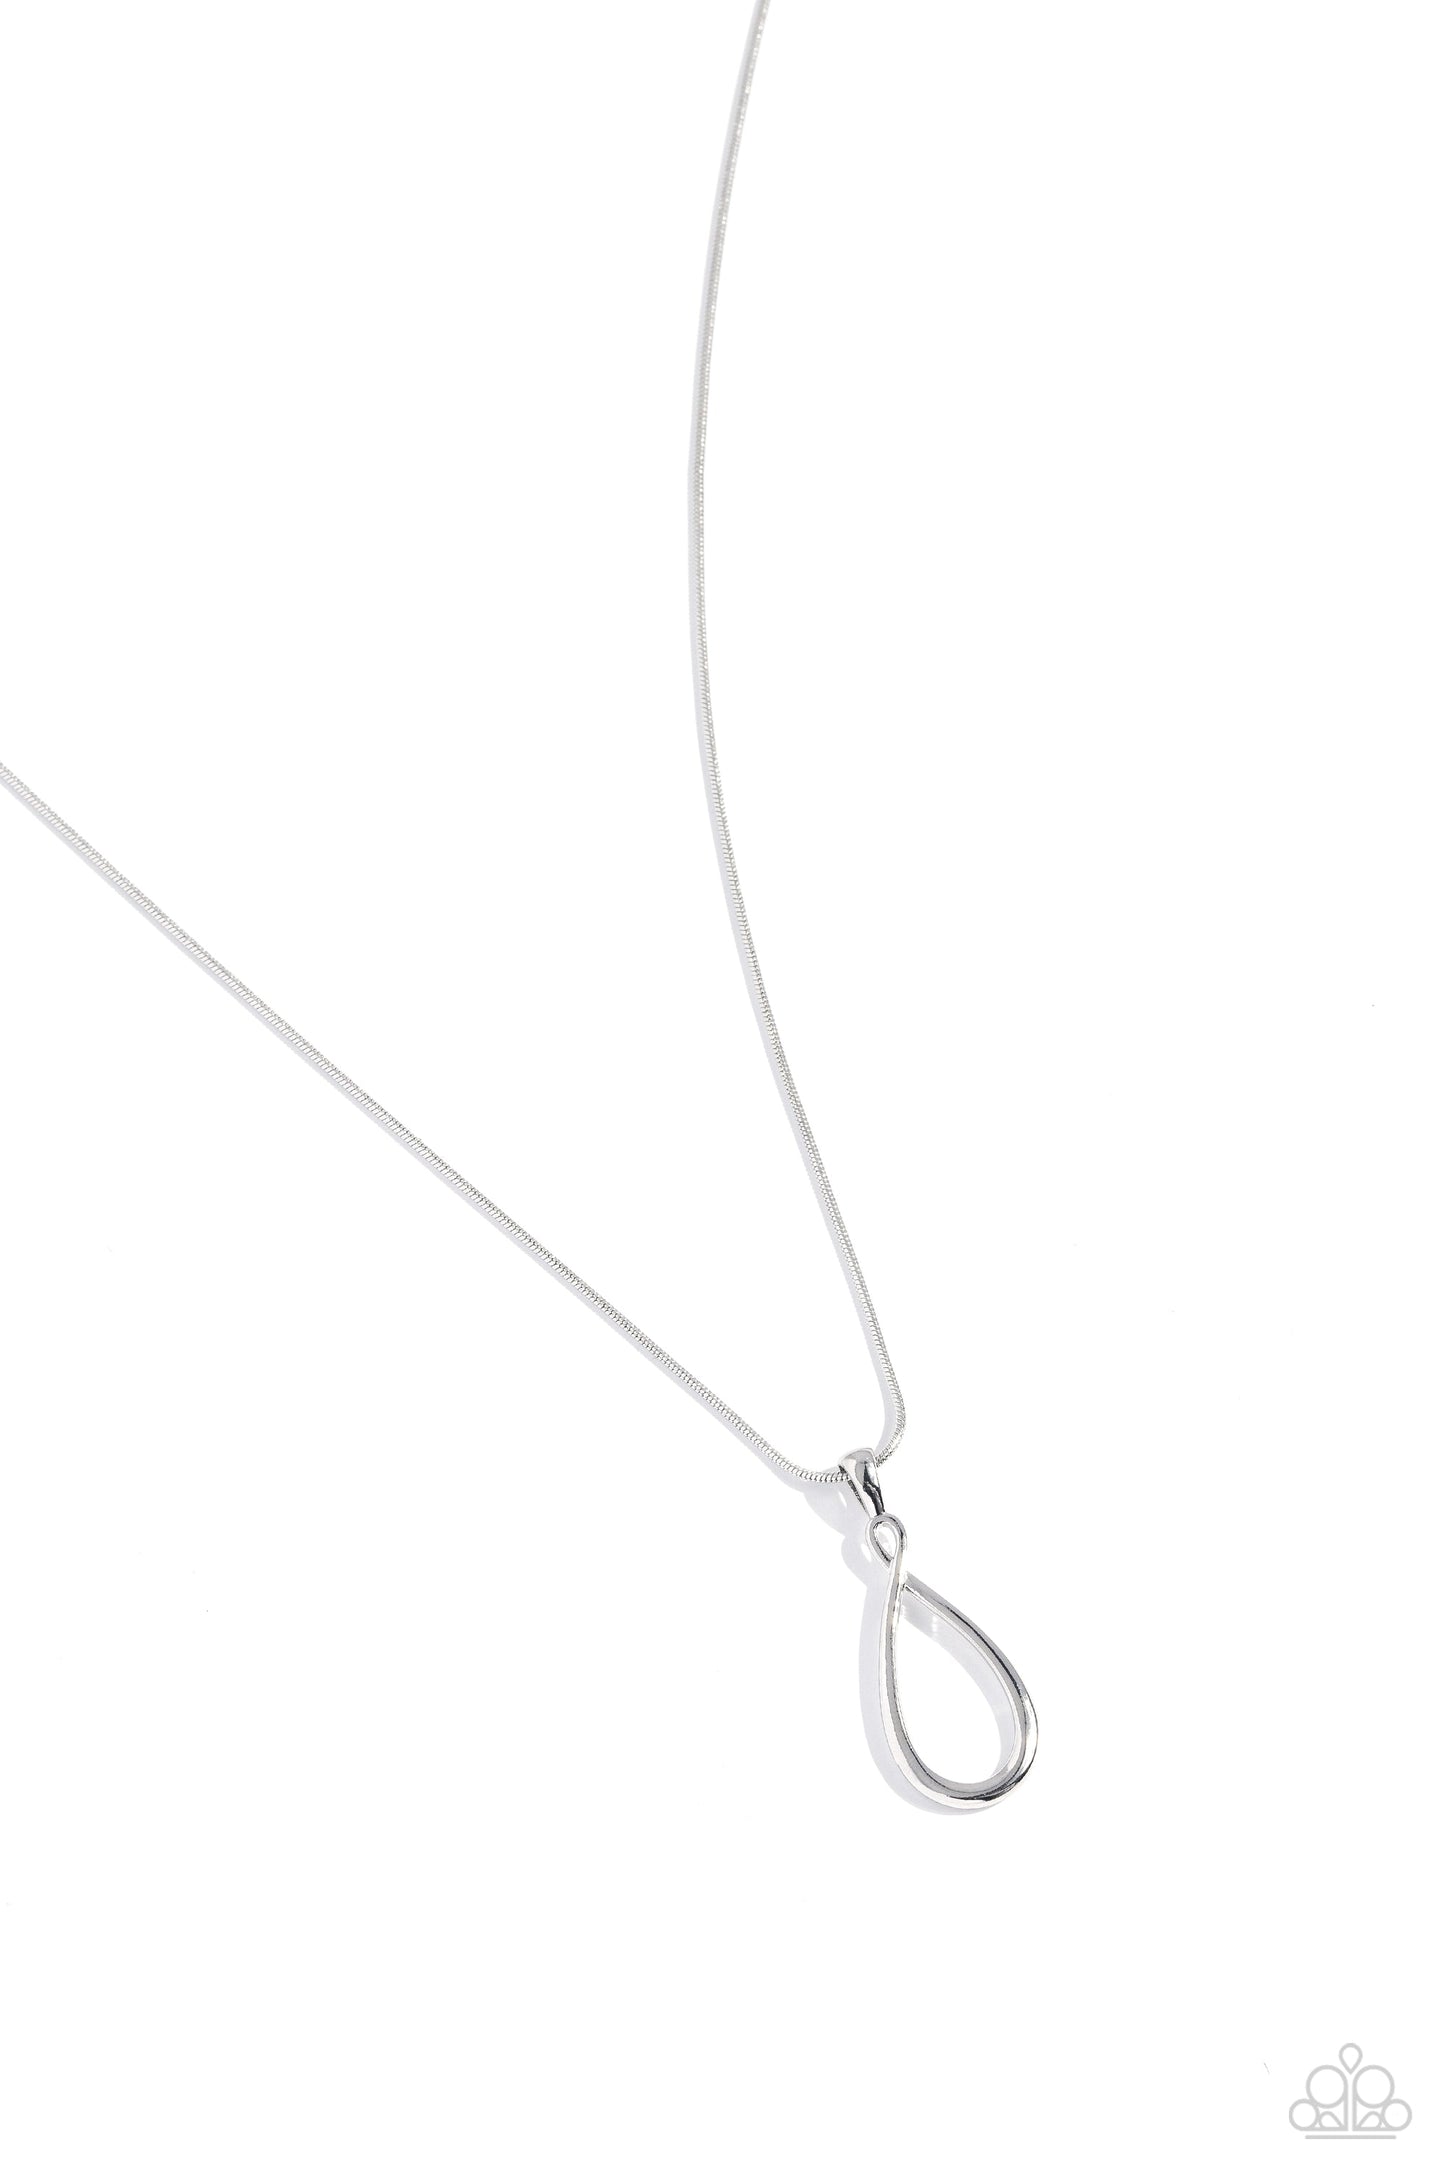 Close to You - Silver Necklace - Paparazzi Accessories - Falling down the neckline from a silver snake chain, a sleek, silver teardrop frame rests for a seemingly simple statement.